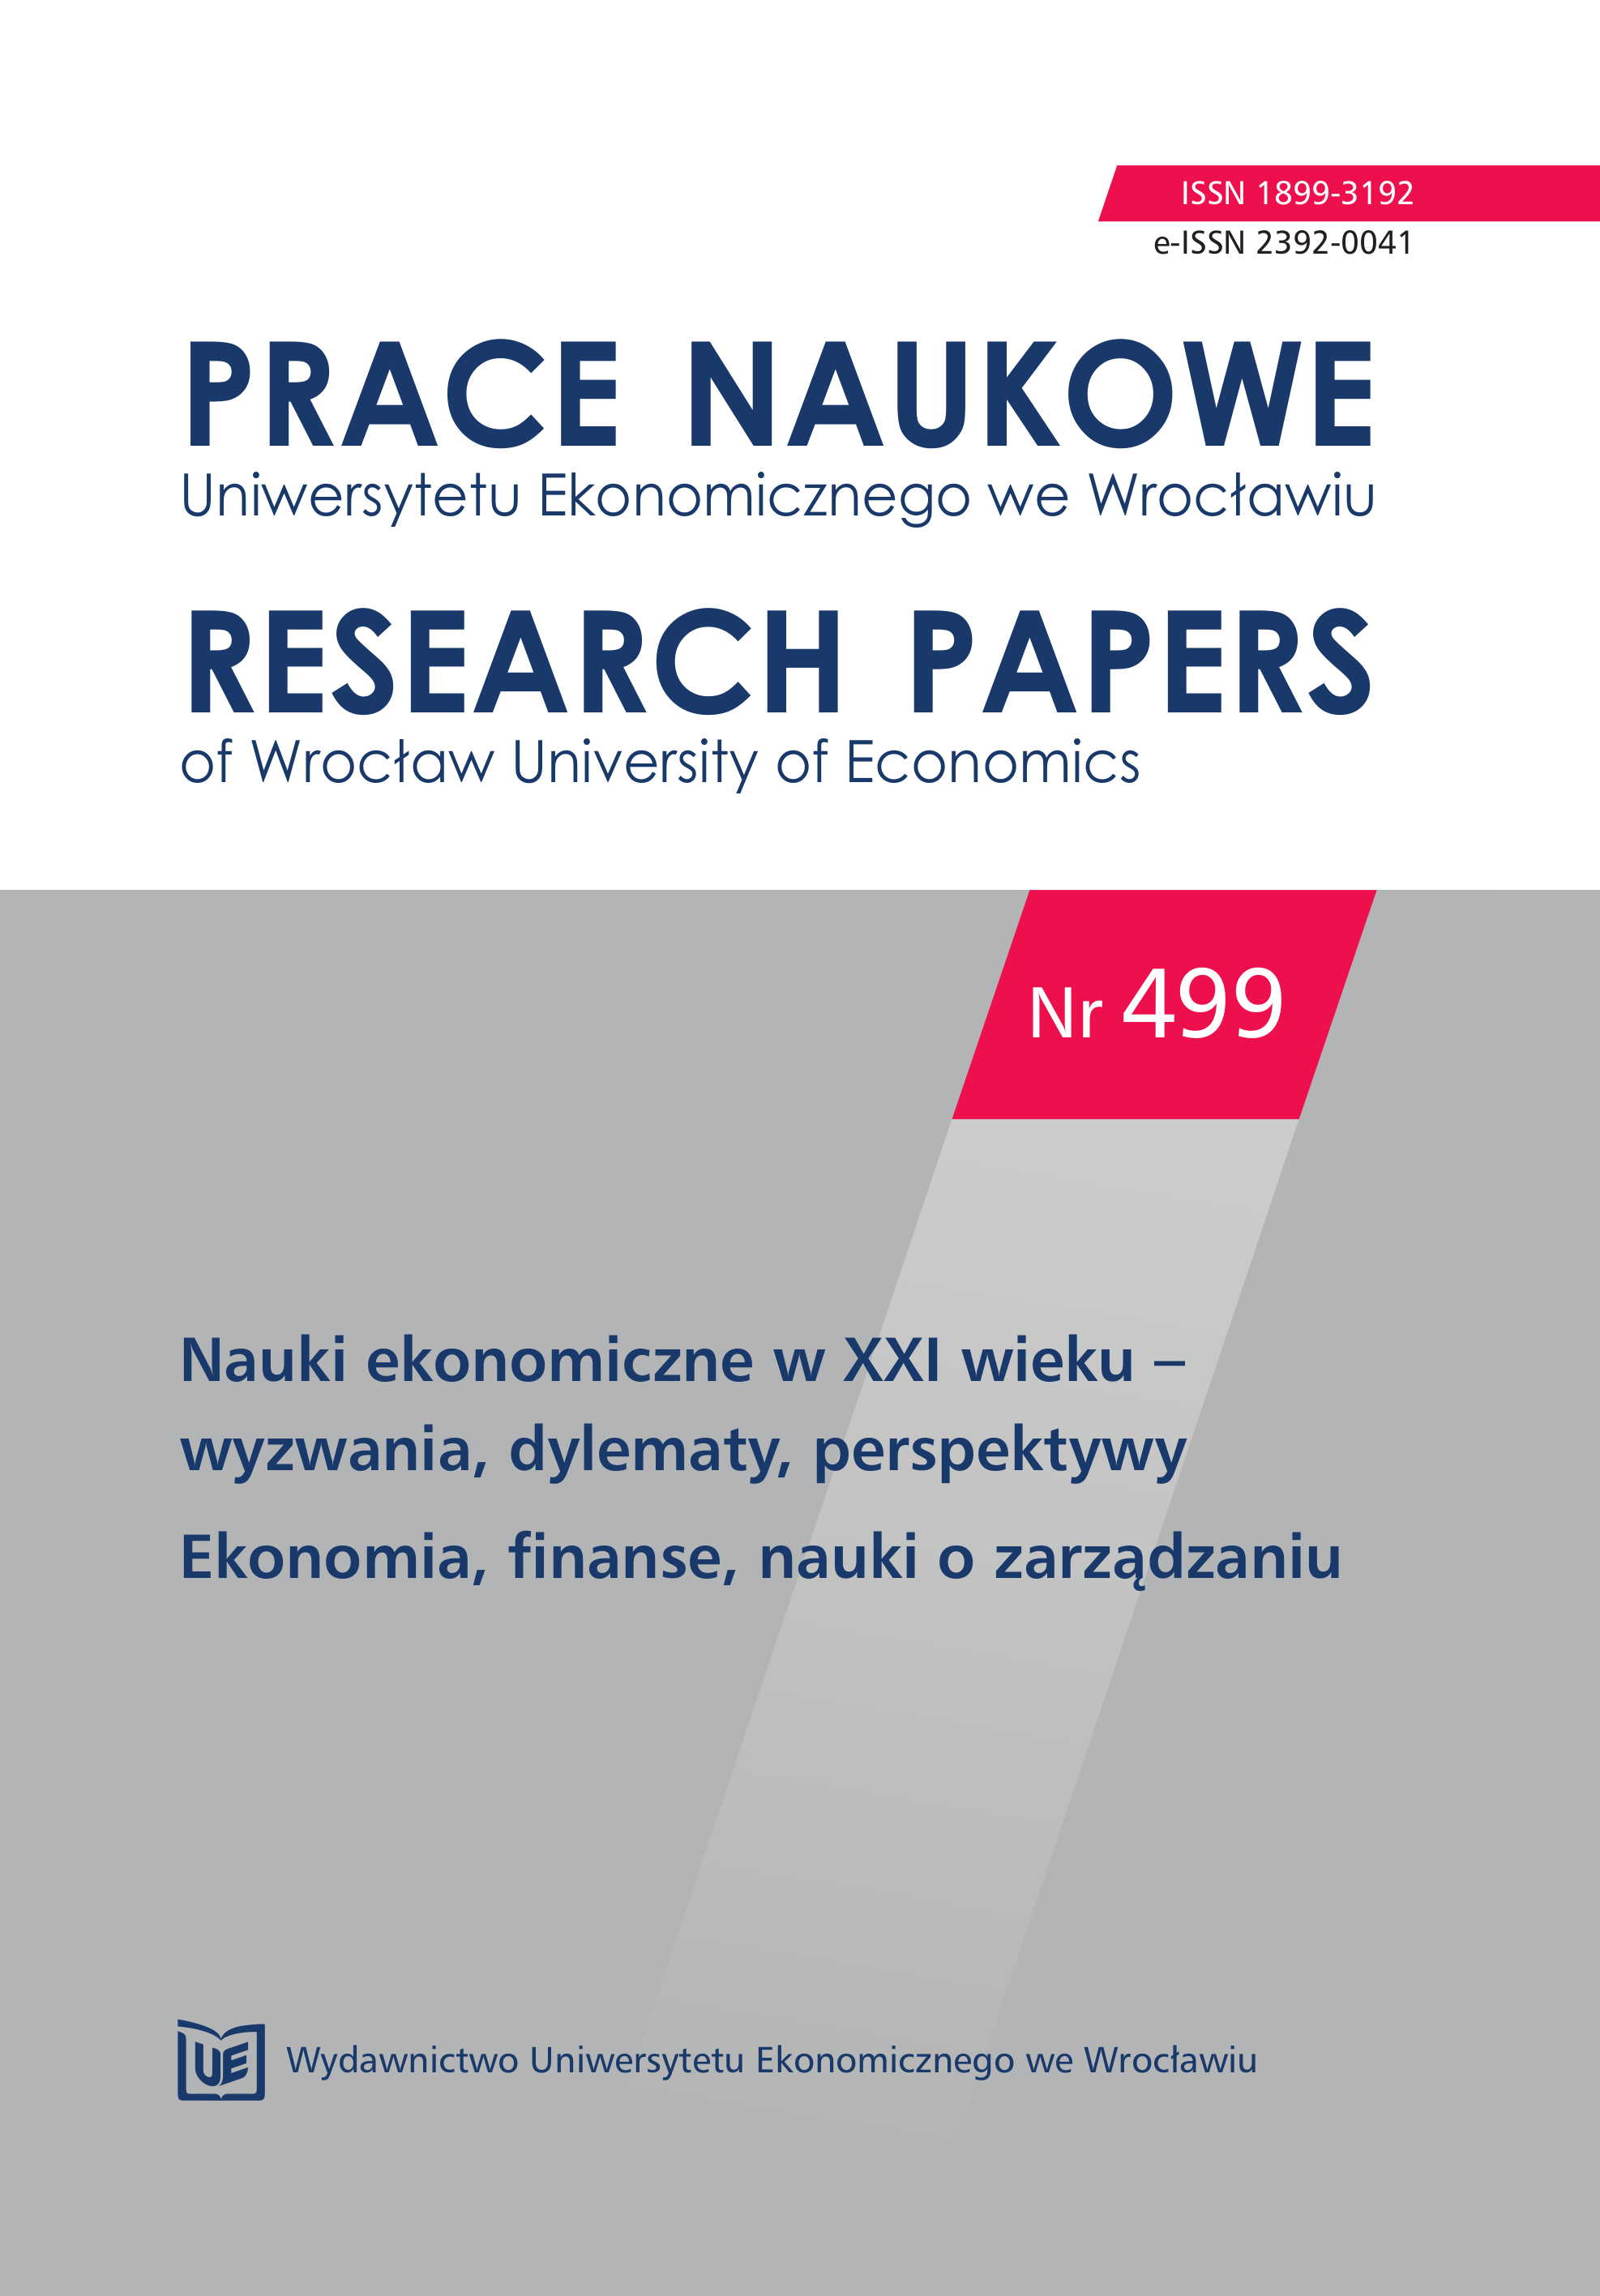 The influence of activation of the wasted postindustrial area on local economy in non-financial view − case study Cover Image